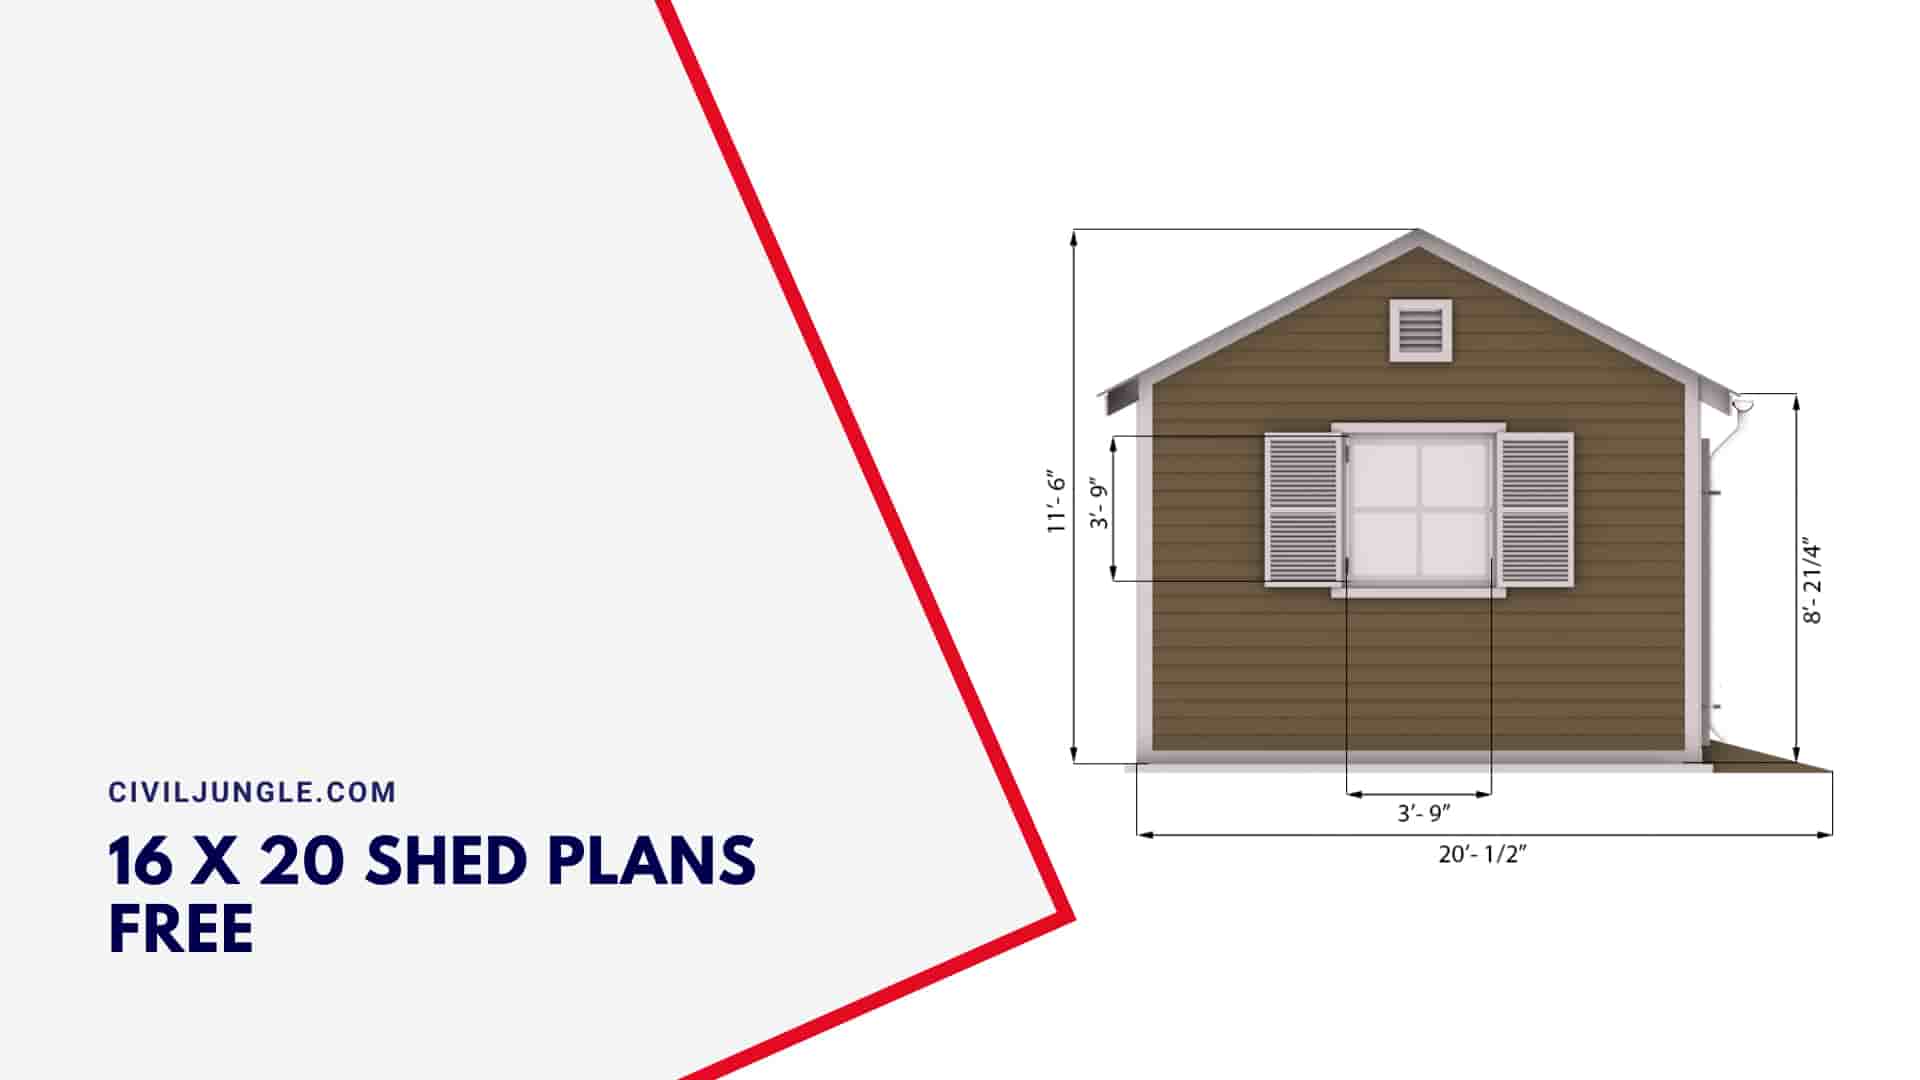 16 X 20 Shed Plans Free